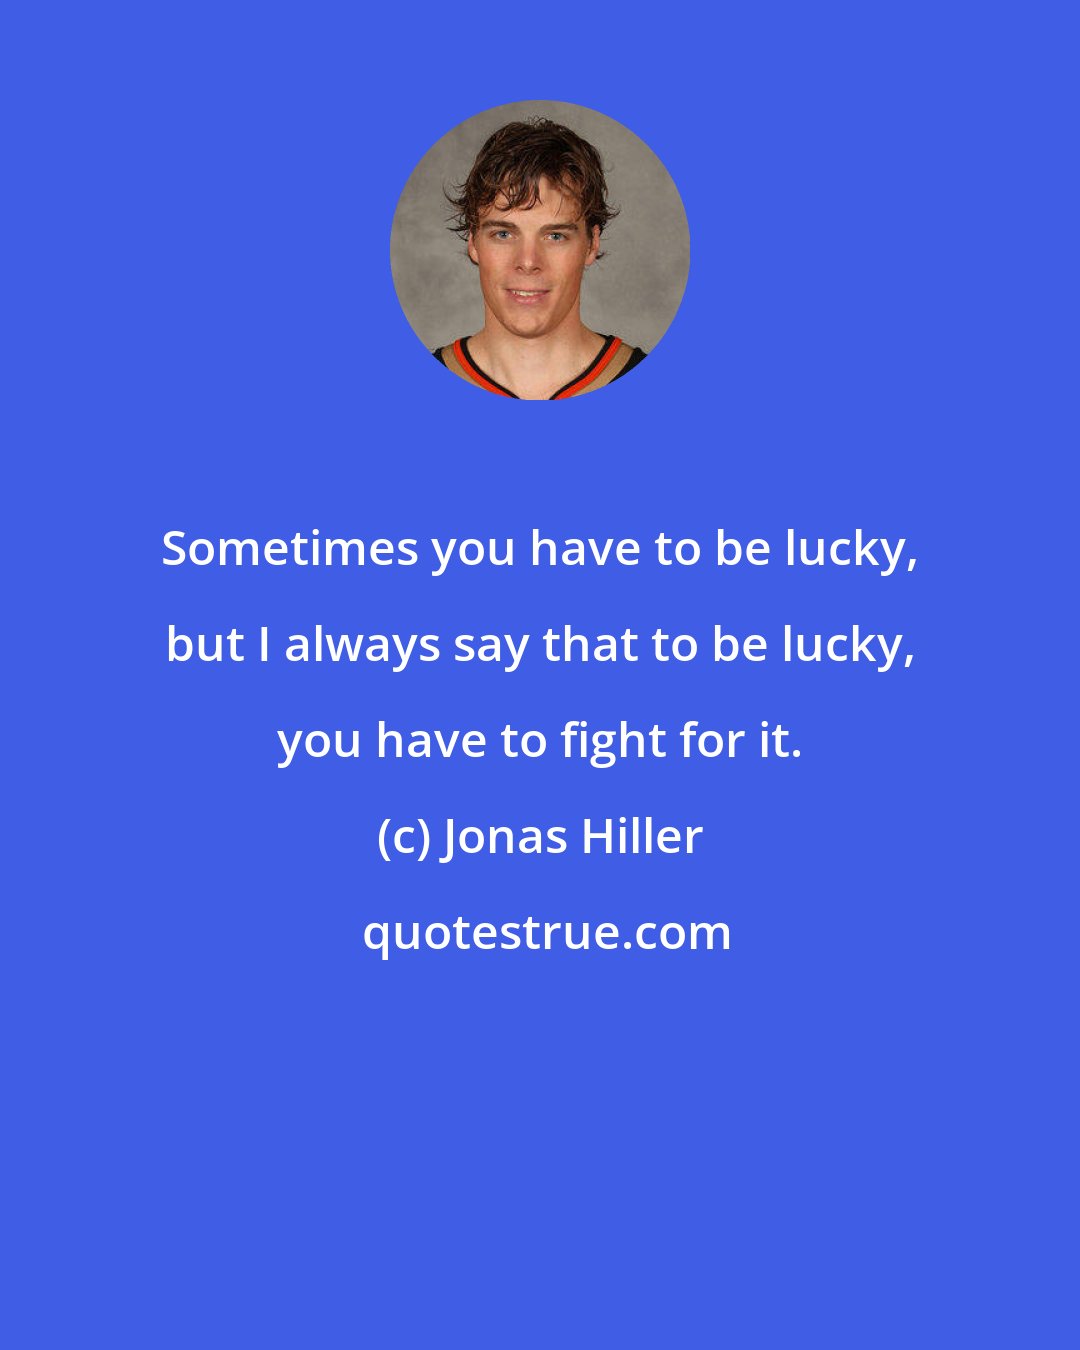 Jonas Hiller: Sometimes you have to be lucky, but I always say that to be lucky, you have to fight for it.